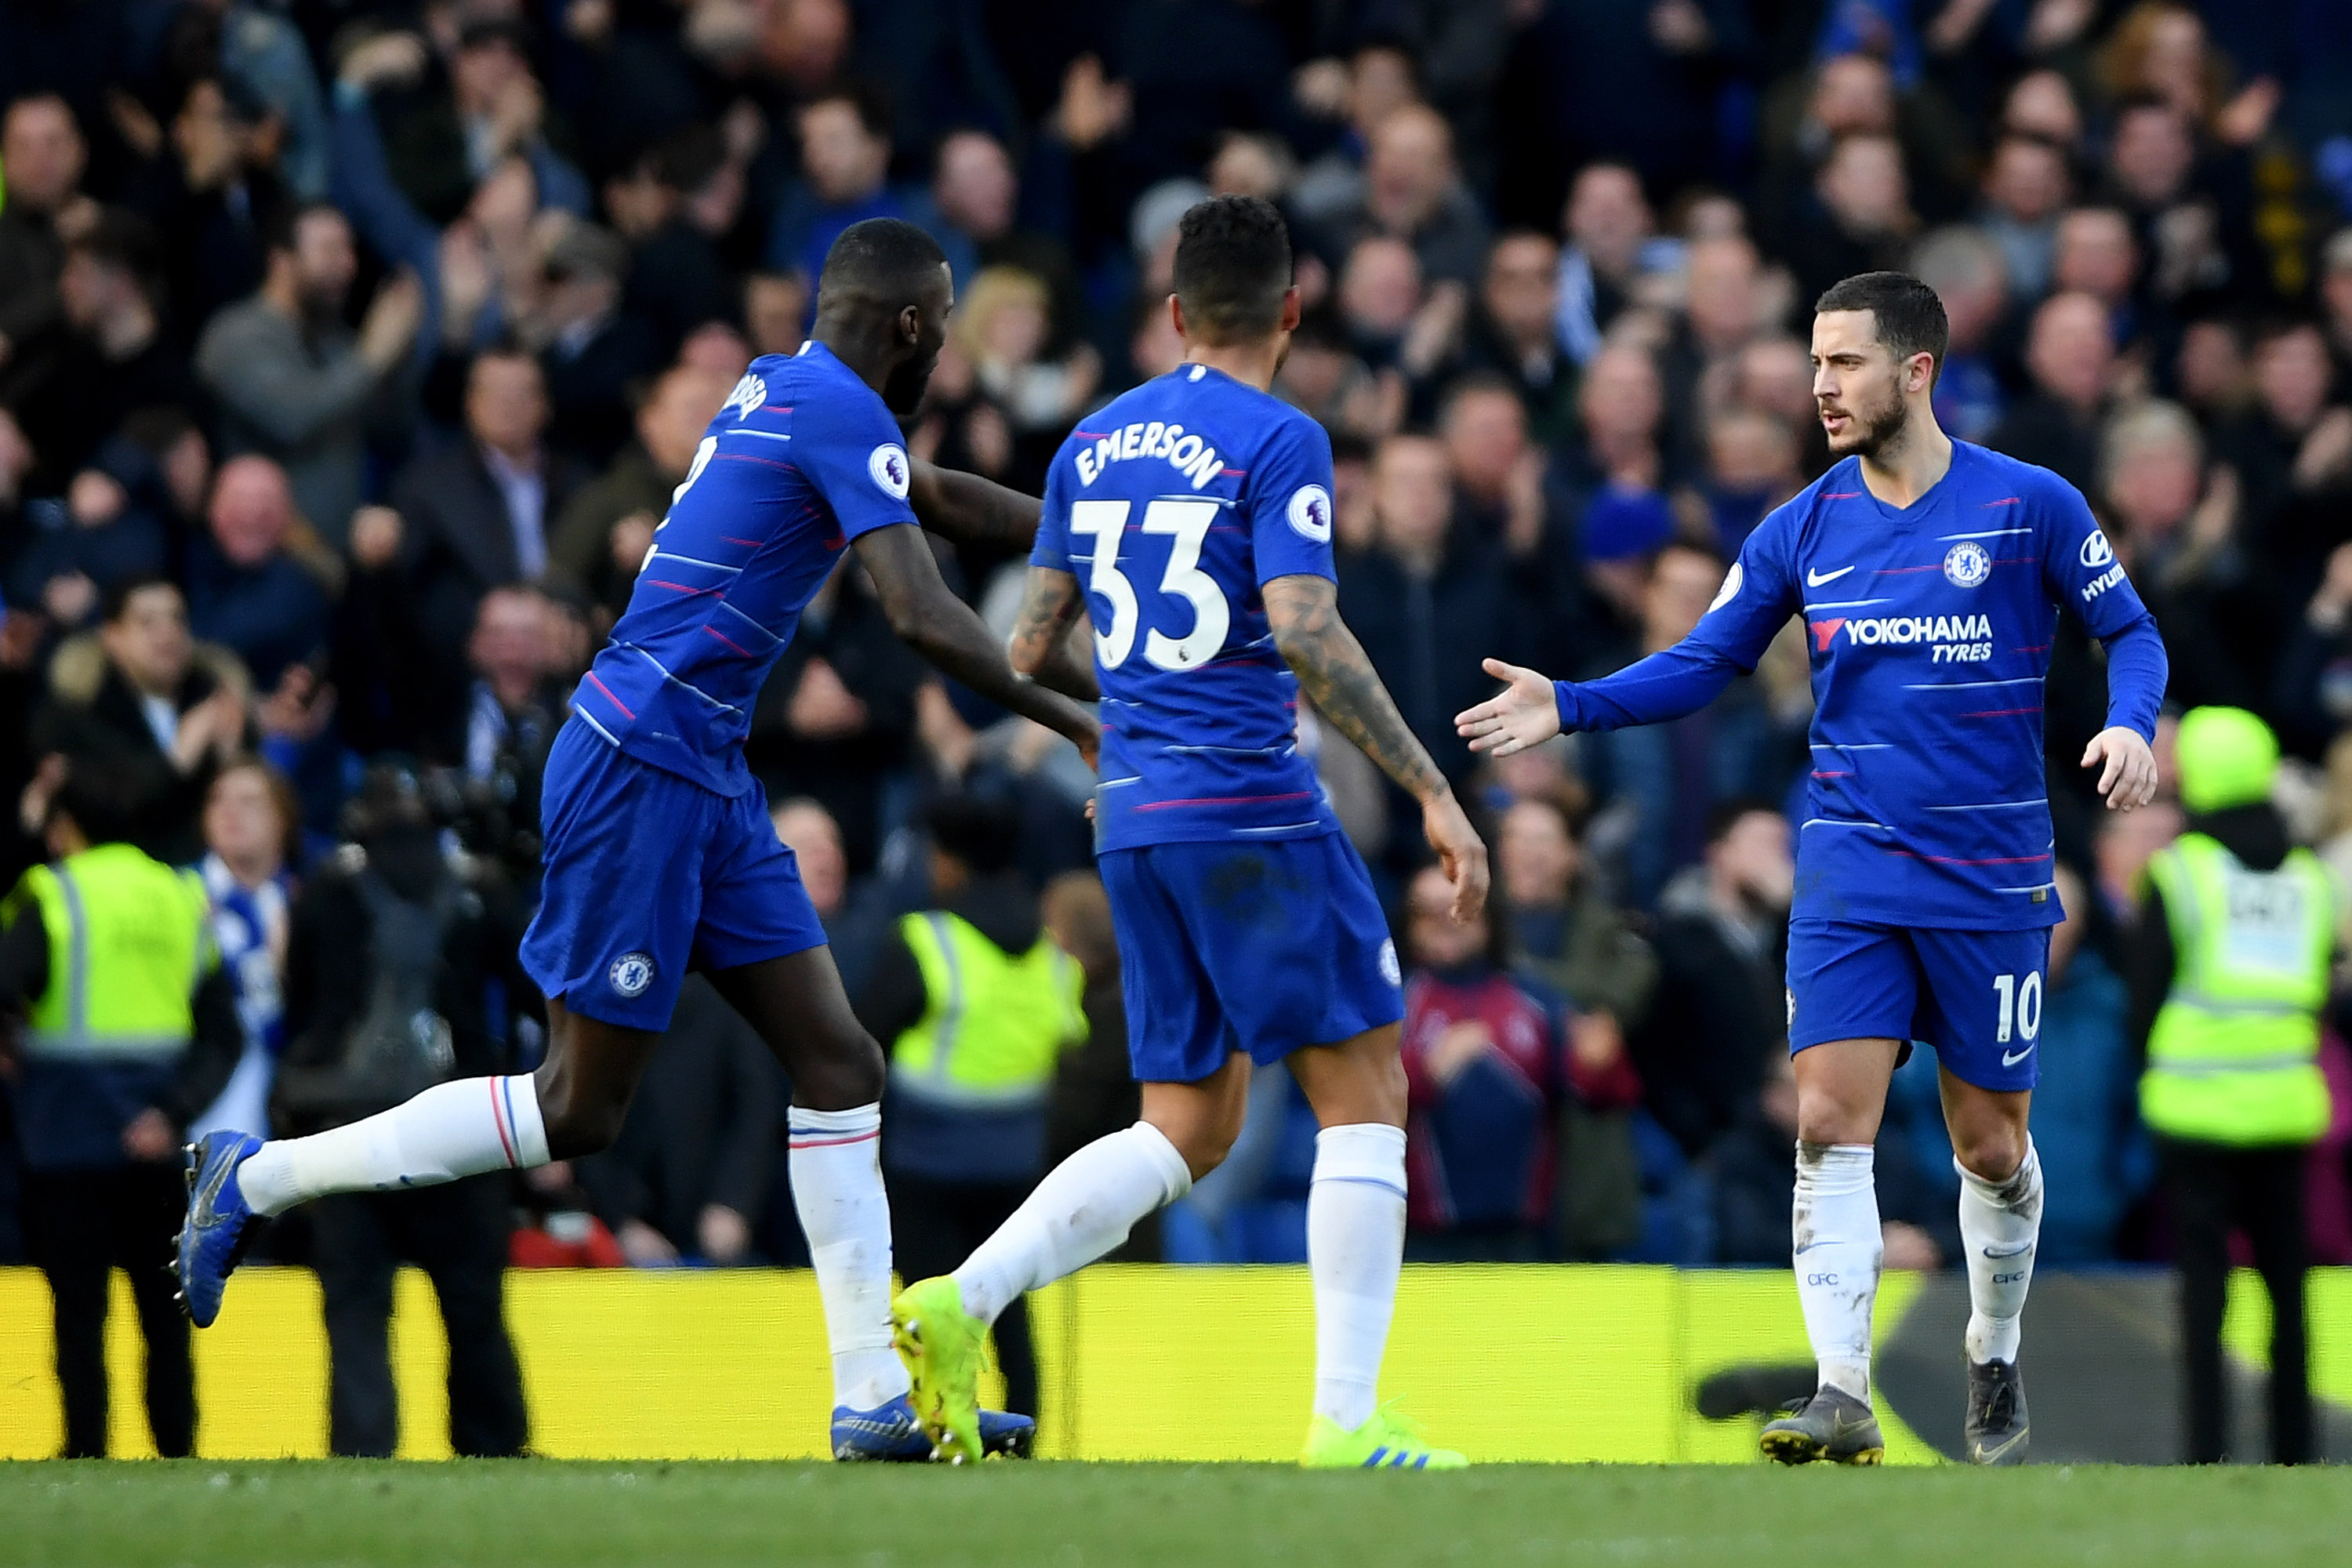 LONDON, ENGLAND - MARCH 10: Eden Hazard of Chelsea celebrates after scoring his team's first goal with teammates Emerson and Antonio Ruediger during the Premier League match between Chelsea FC and Wolverhampton Wanderers at Stamford Bridge on March 10, 2019 in London, United Kingdom. (Photo by Mike Hewitt/Getty Images)